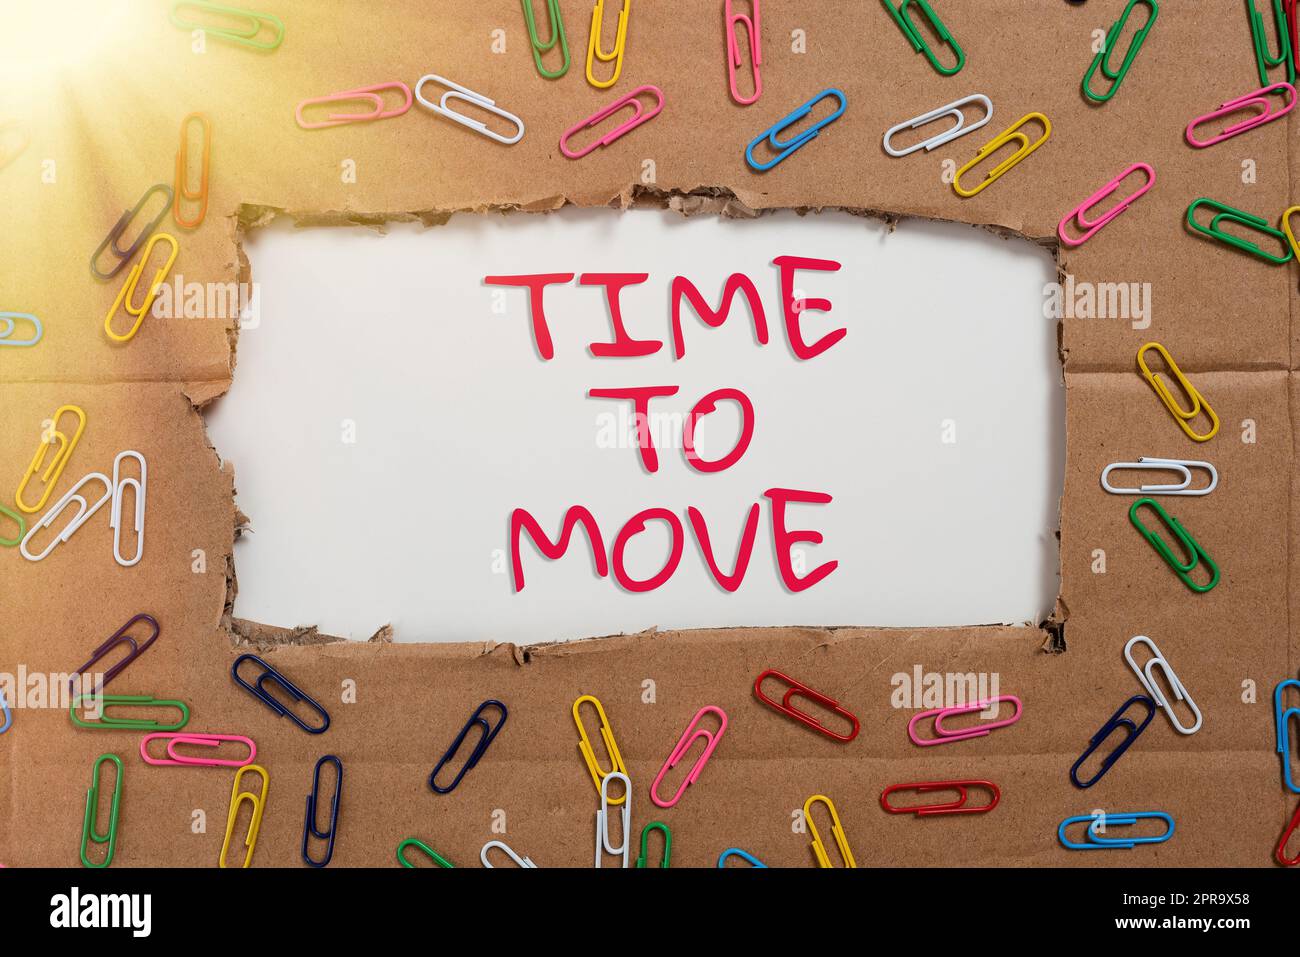 Writing displaying text Time To Move. Business approach Best period to transfer Relocation Change the current path Important Ideas Written Under Ripped Cardboard With Paperclips Around. Stock Photo